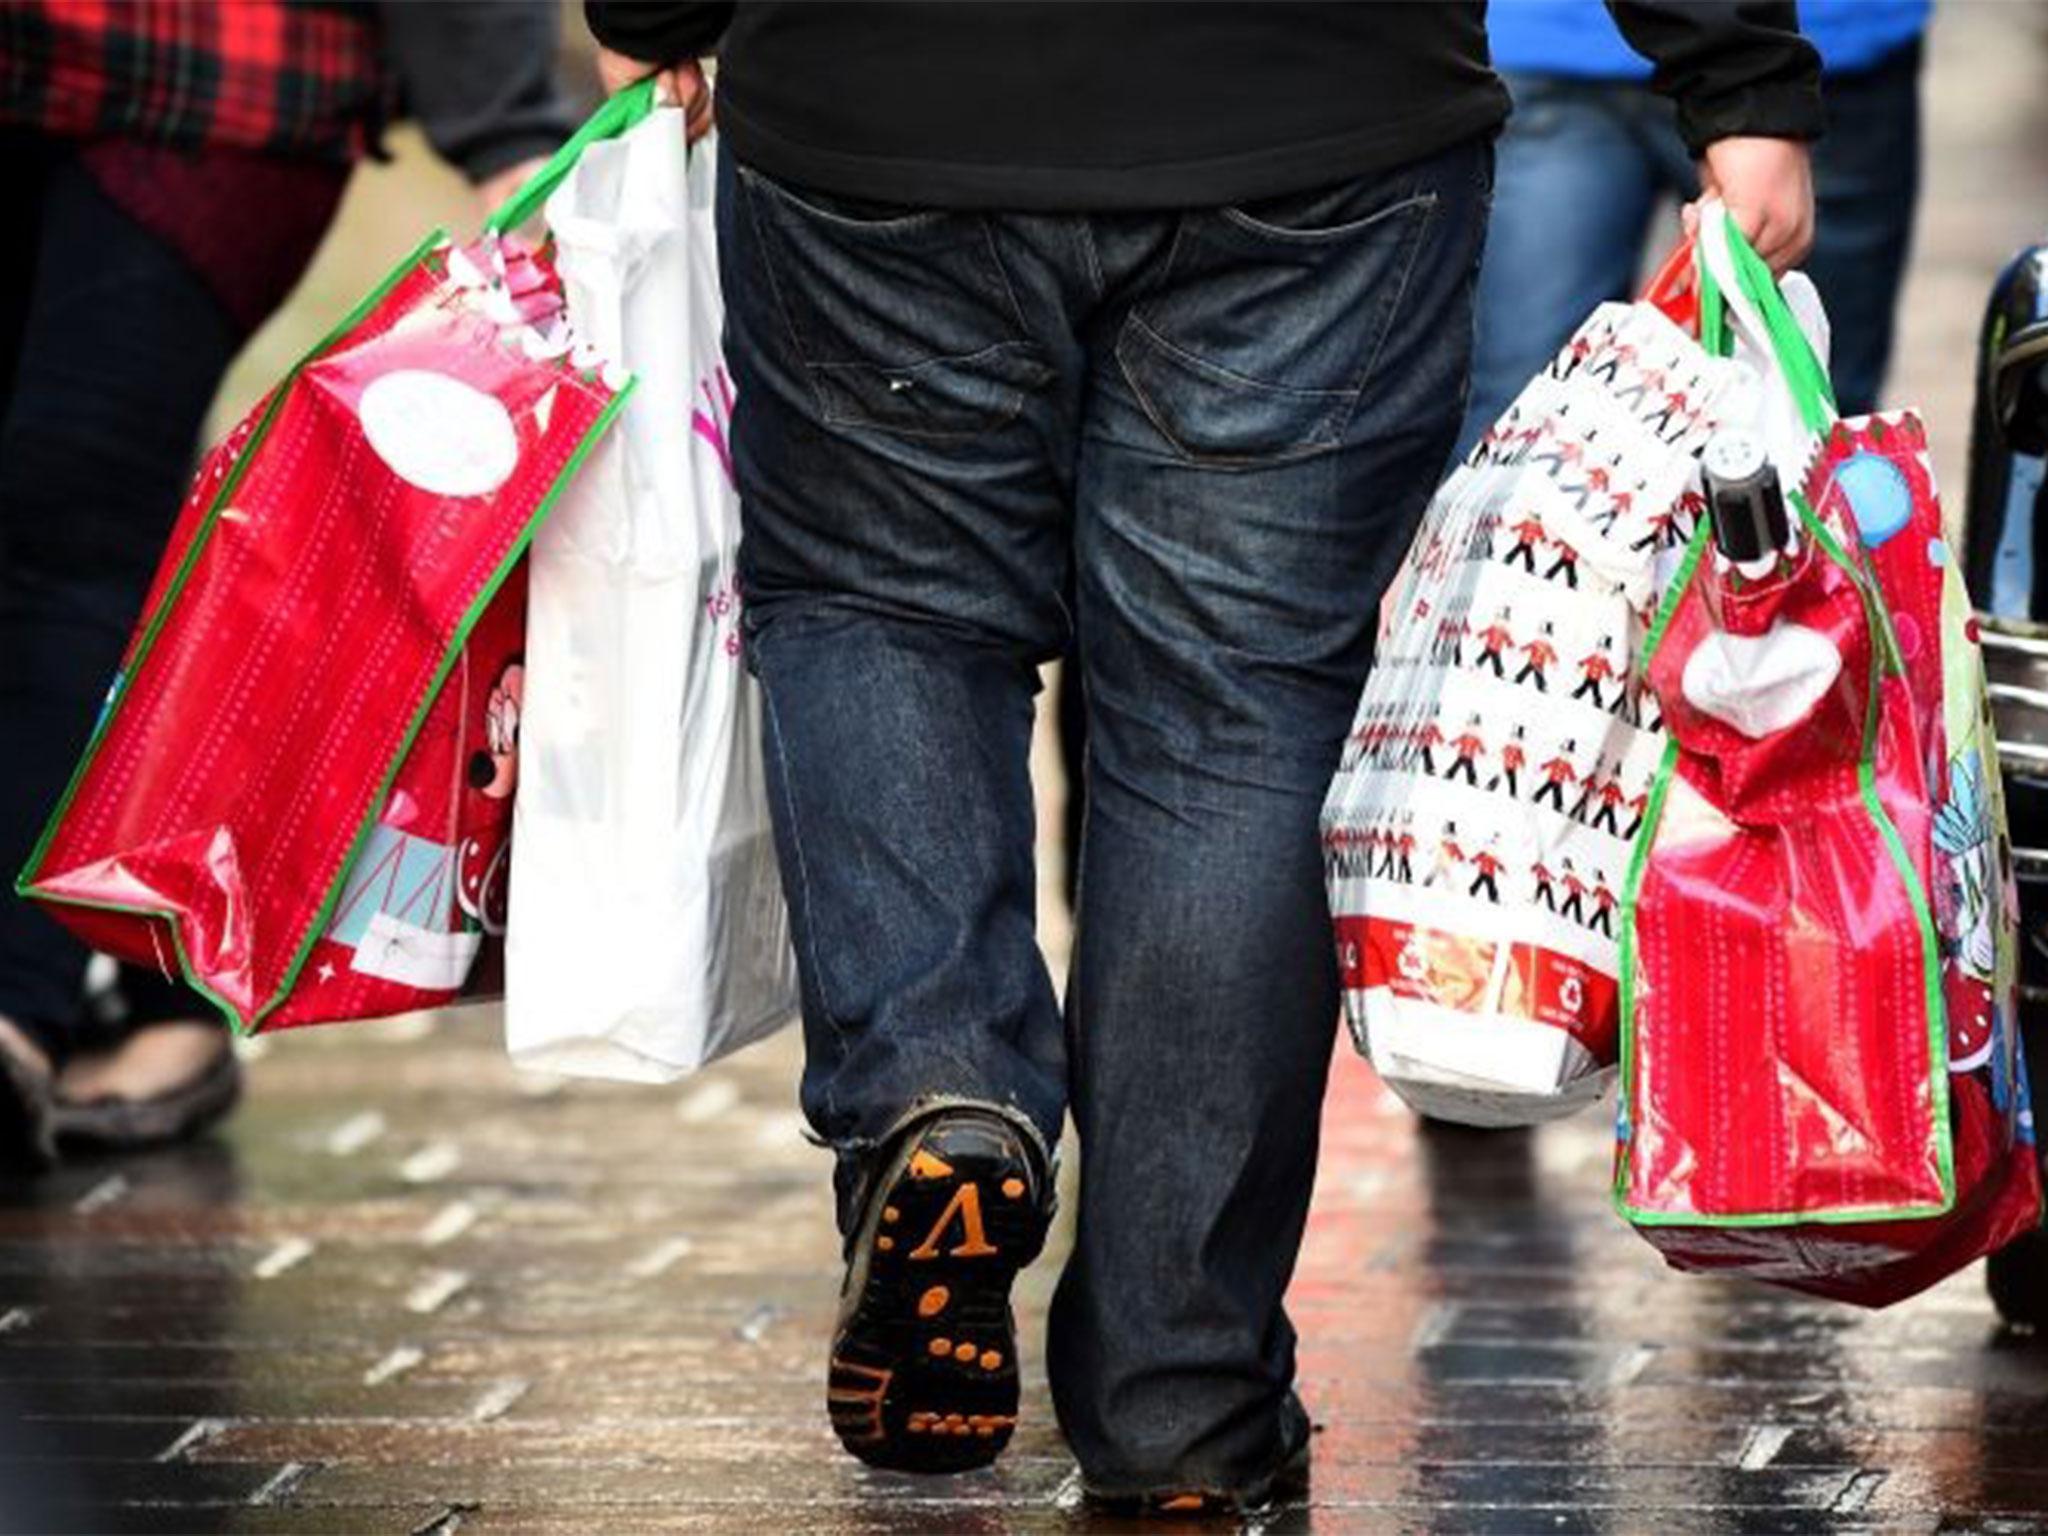 Overall spending in the final few days before Christmas is expected to be 7 per cent higher than last year, with many consumers going into debt to fund it